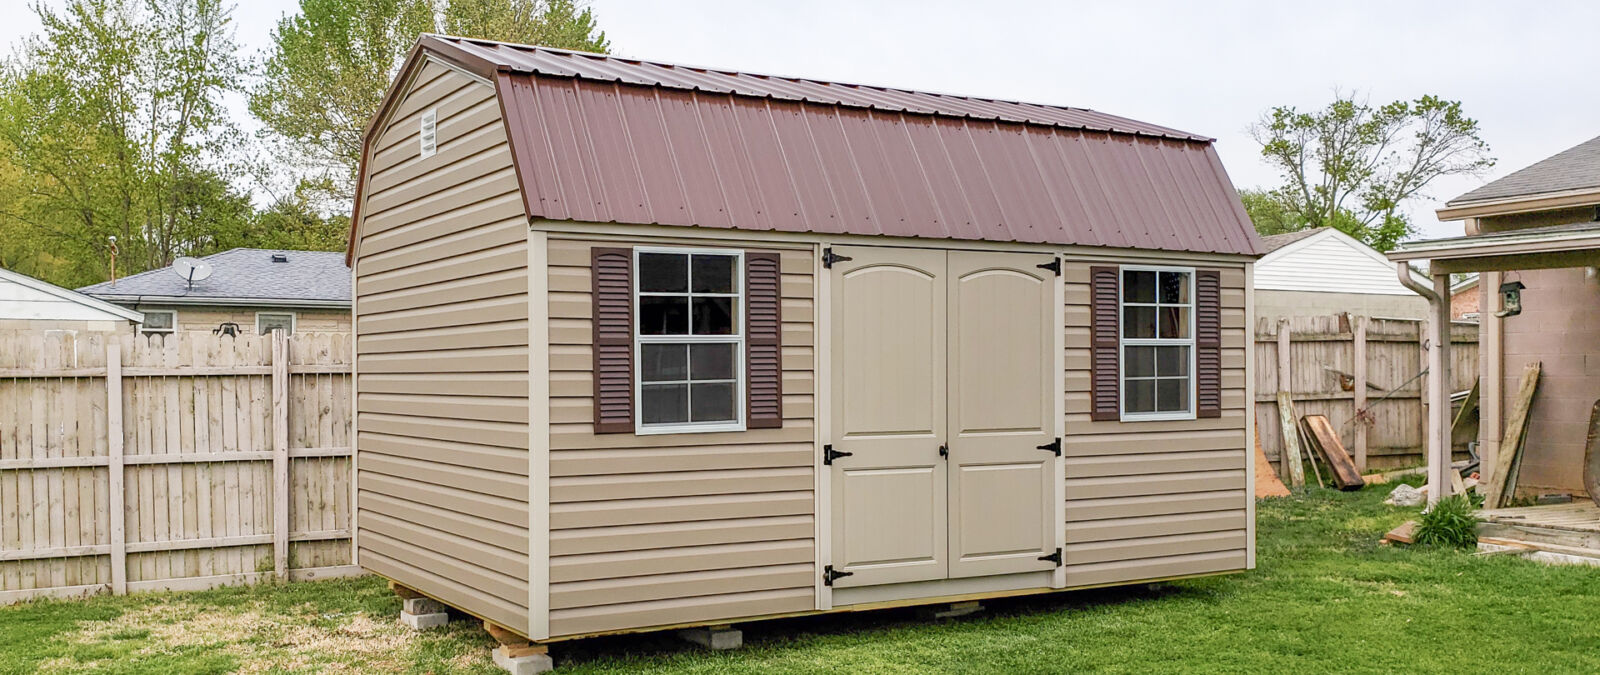 sheds for sale in ky and tn